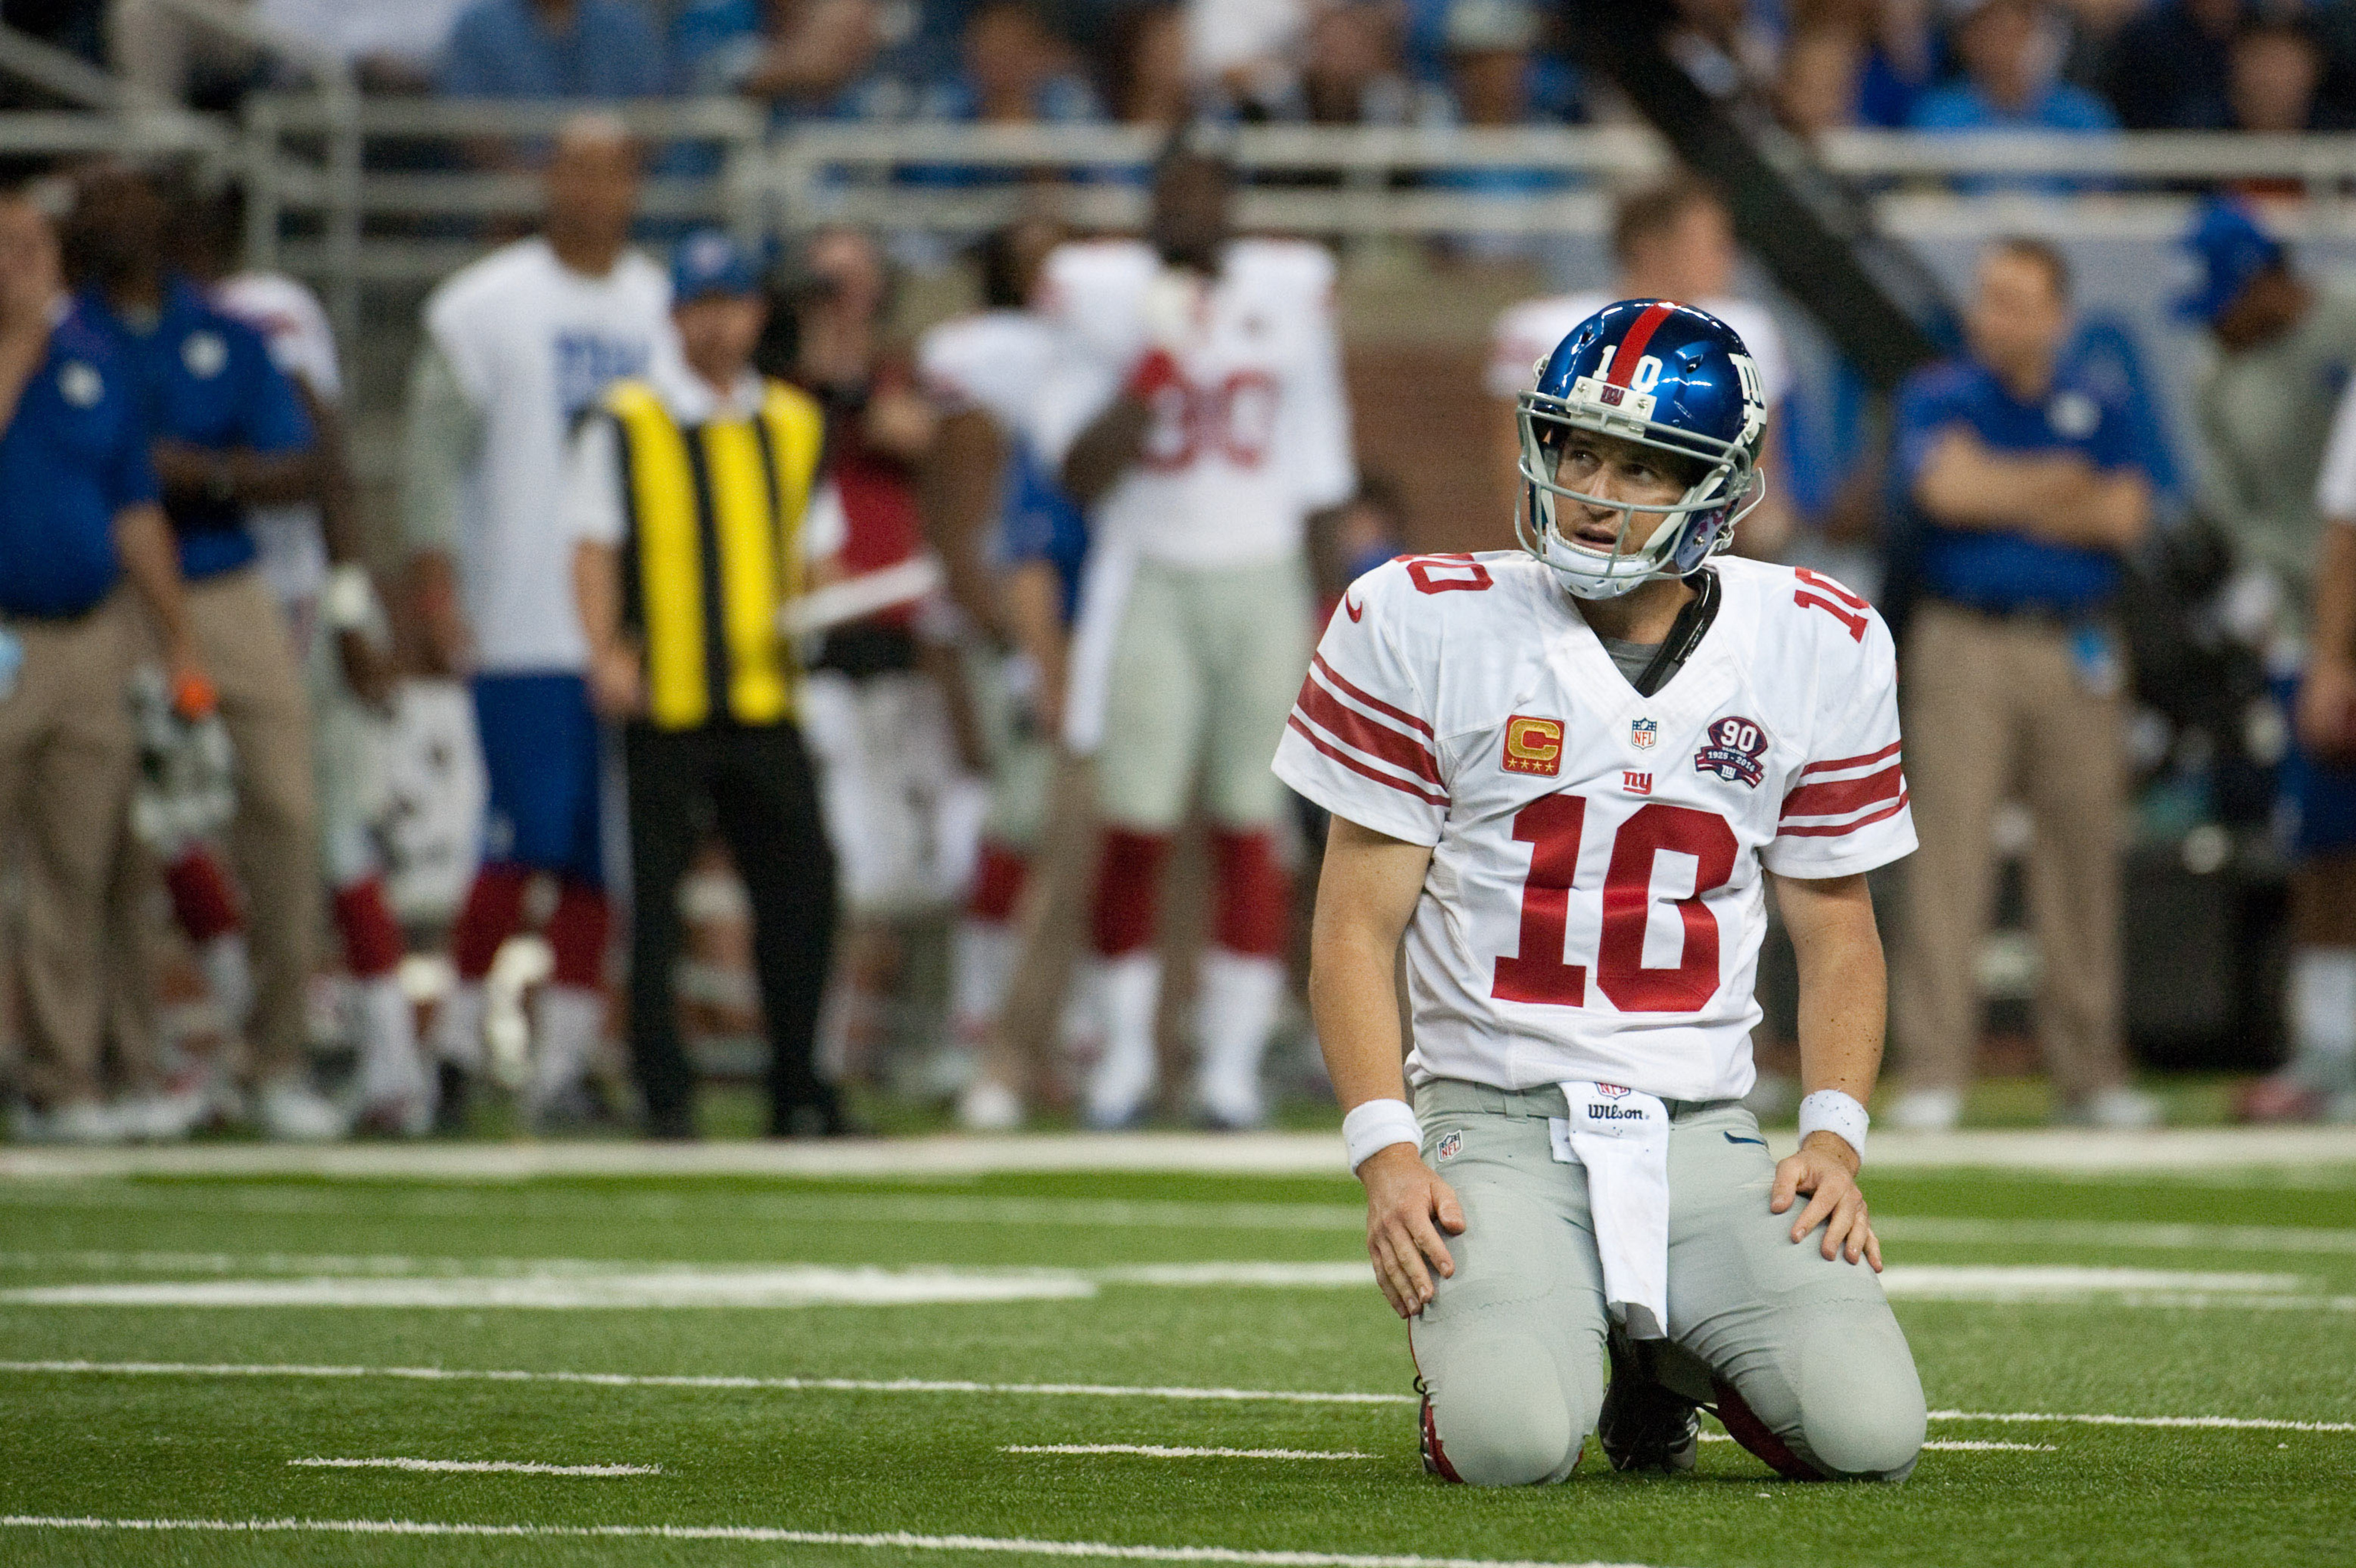 The Lions brought Eli Manning and the Giants to their knees Monday night